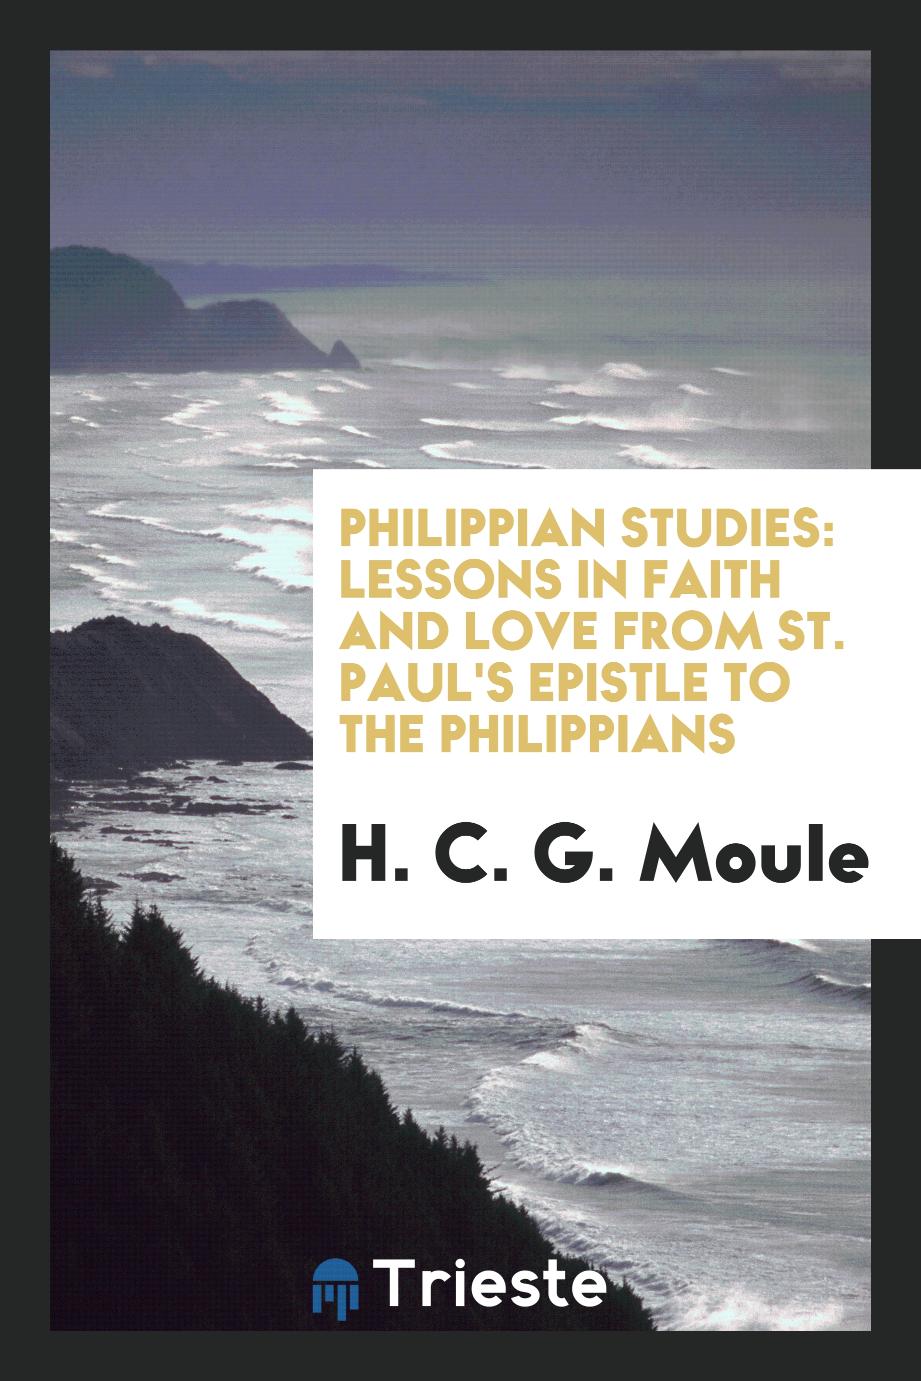 Philippian studies: lessons in faith and love from St. Paul's Epistle to the Philippians